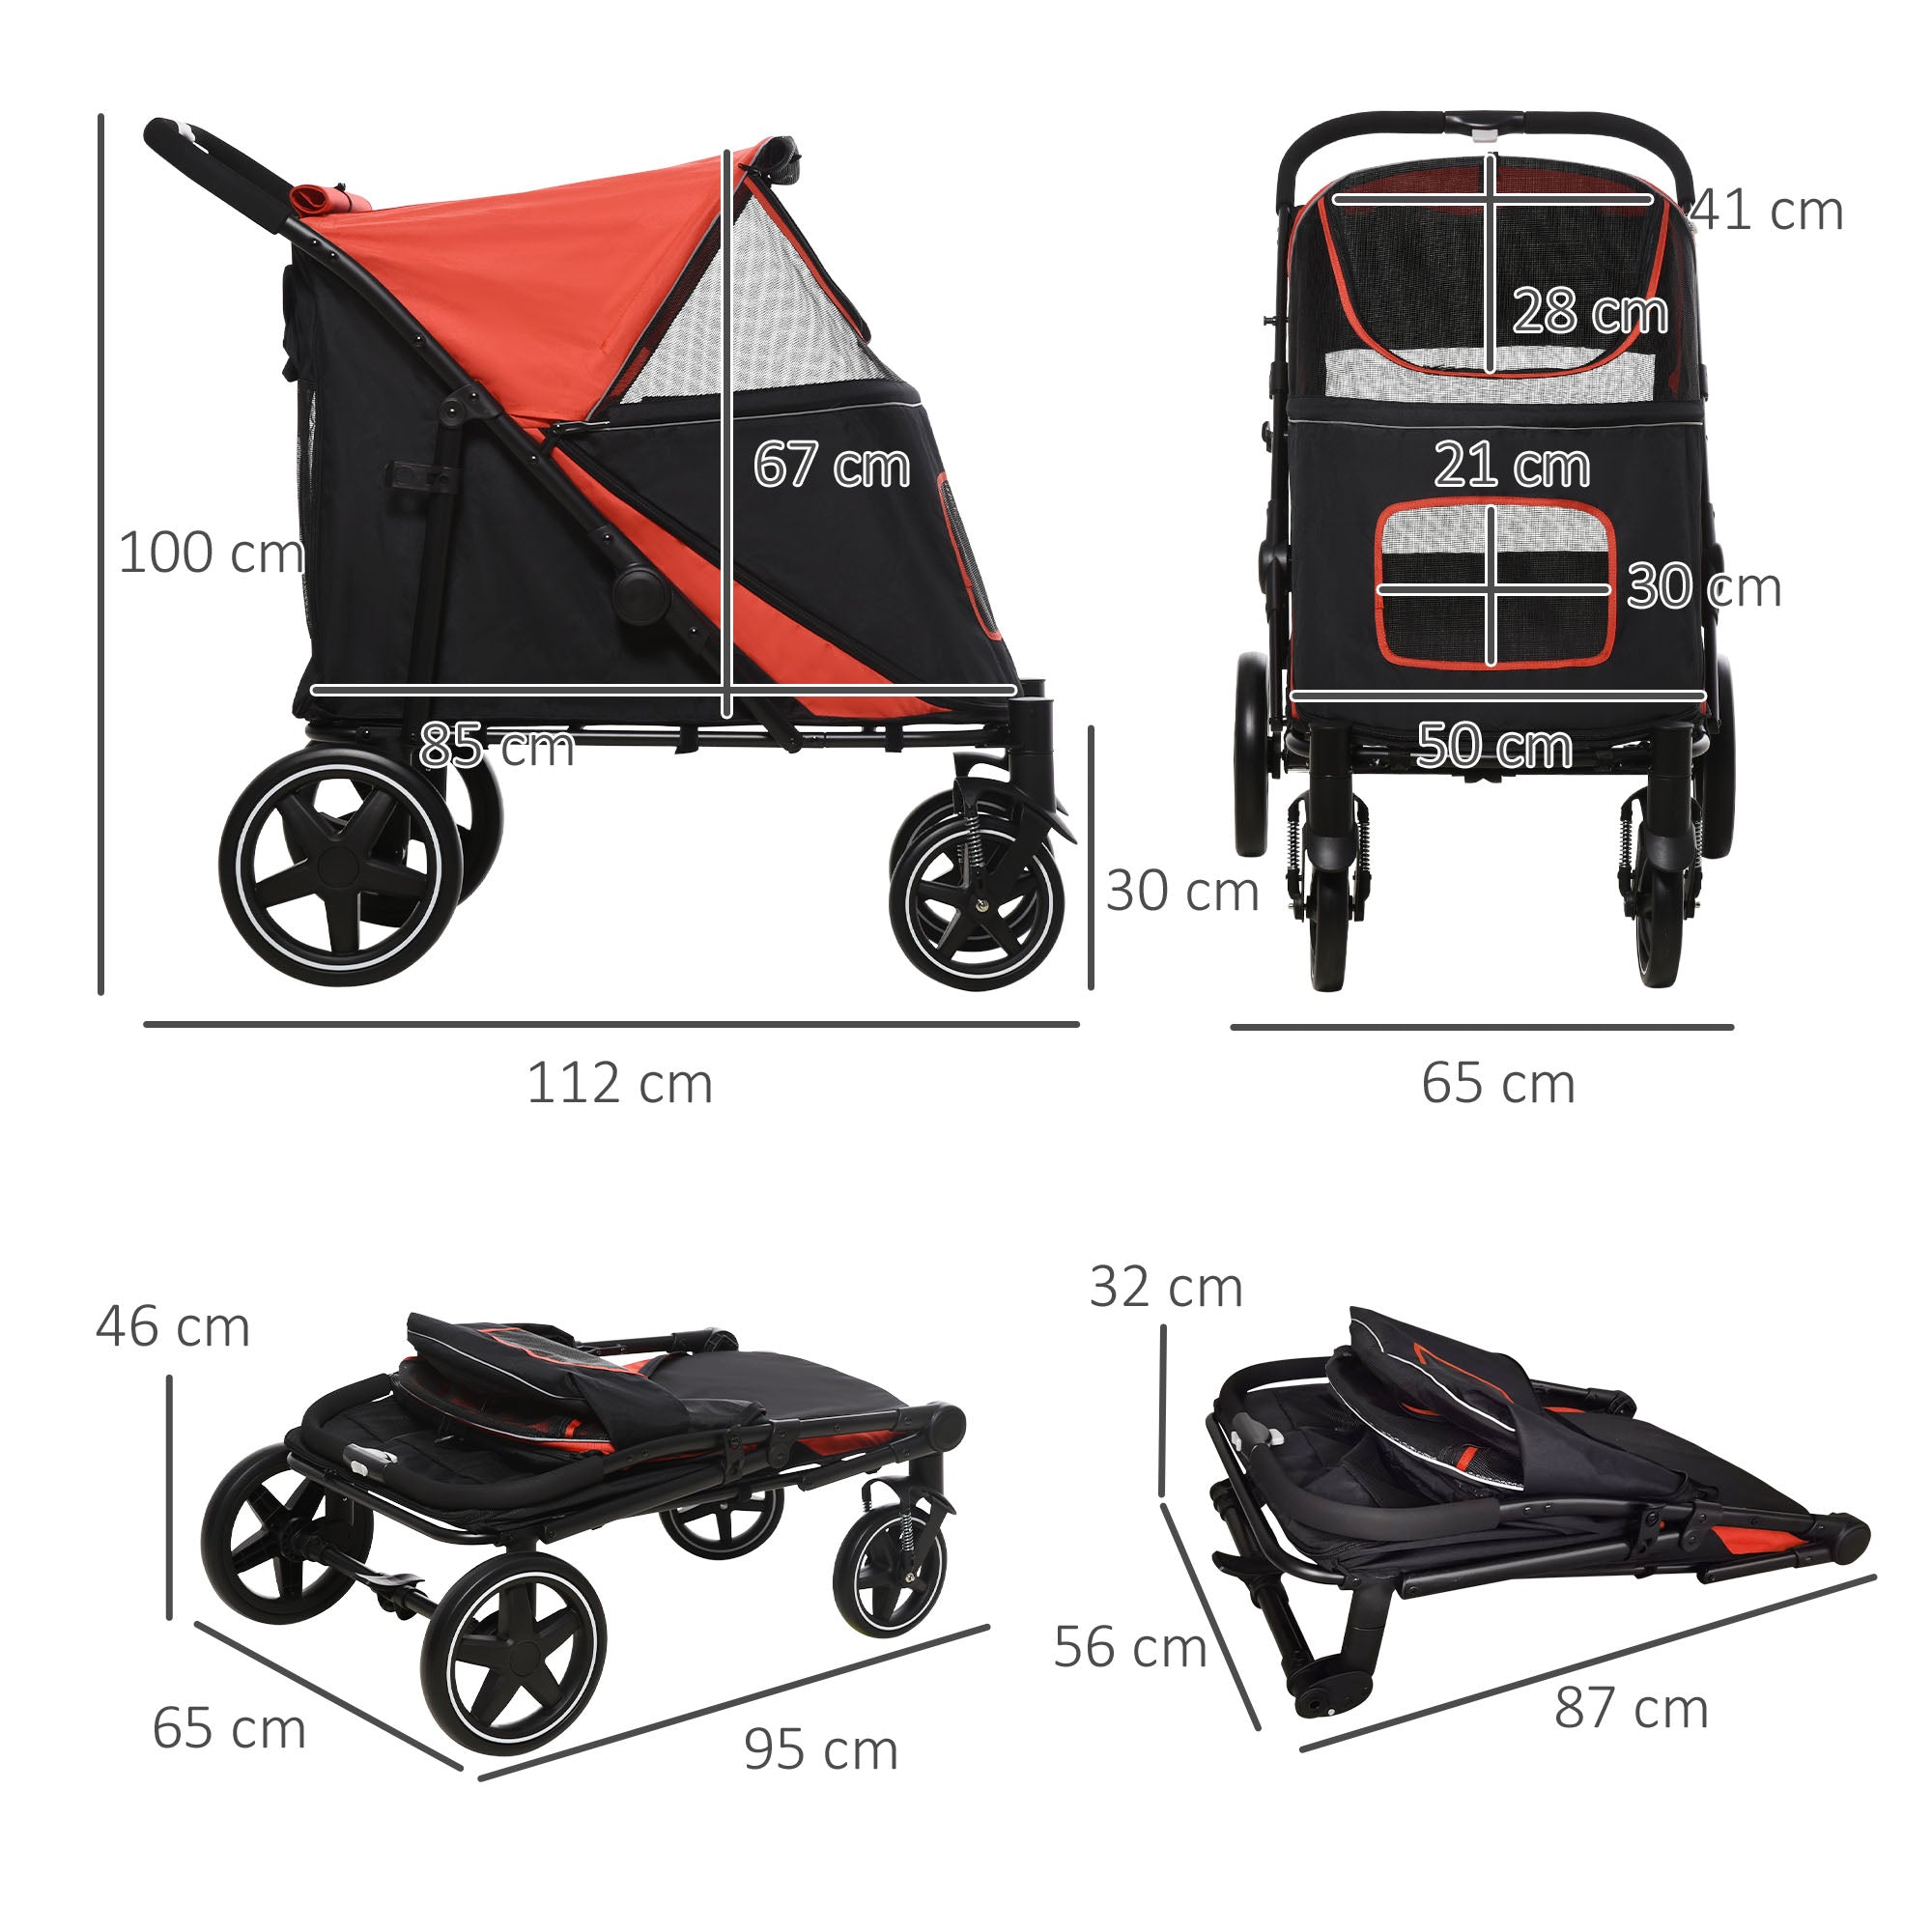 Pet Stroller with Universal Front Wheels, Shock Absorber, One Click Foldable Dog Cat Carriage with Brakes, Storage Bags, Mesh Window Red-2